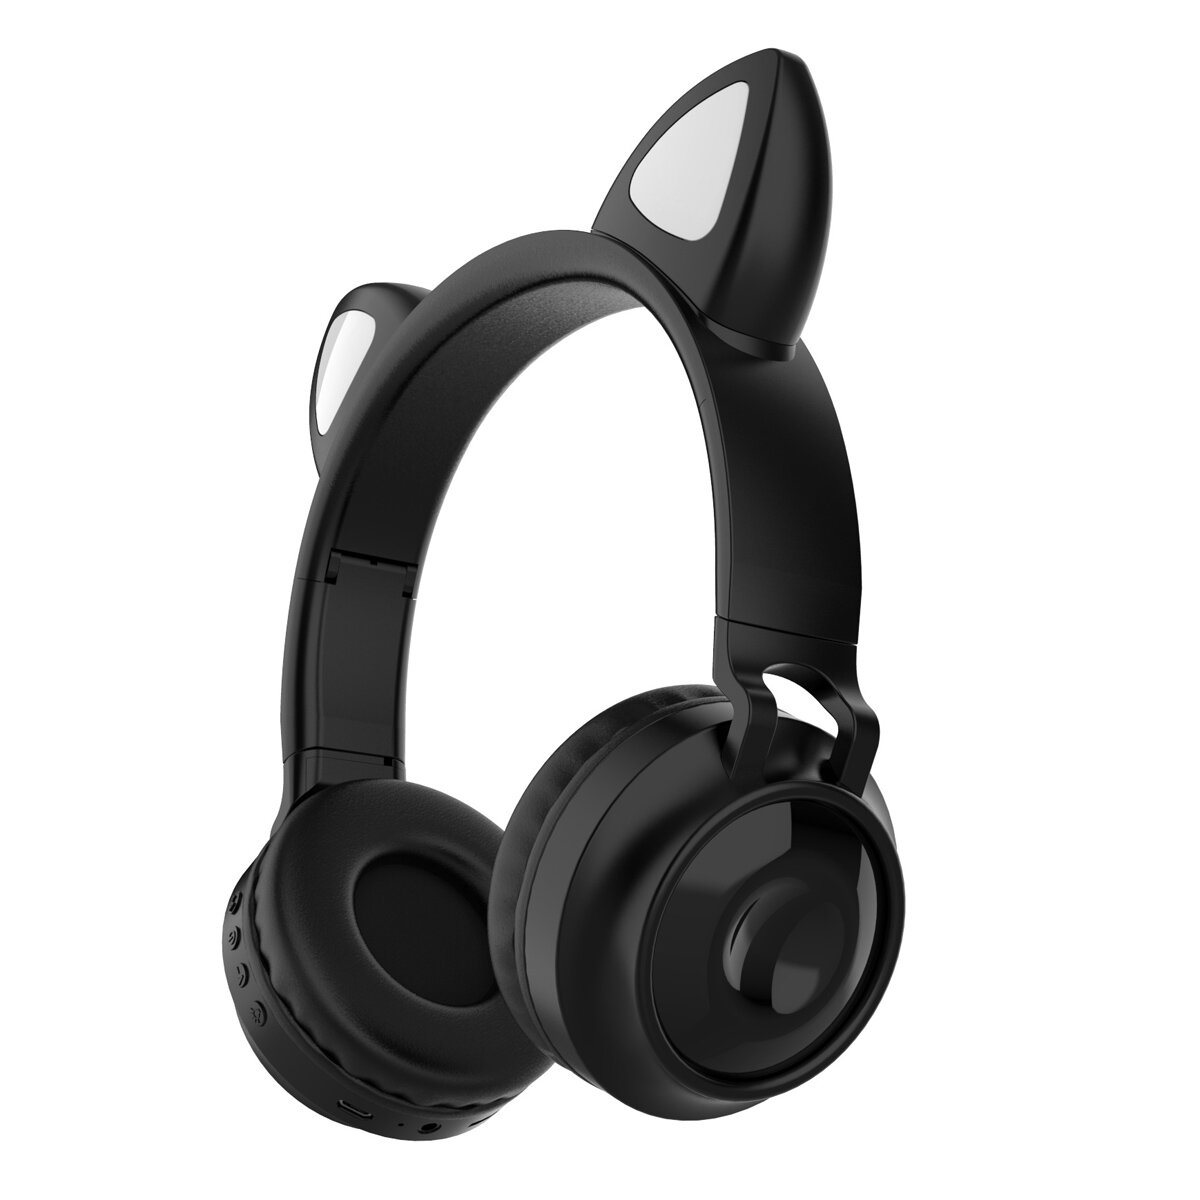 Wireless bluetooth Headphone Portable Foldable Over-ear Stereo Music Sport Headset with Mic